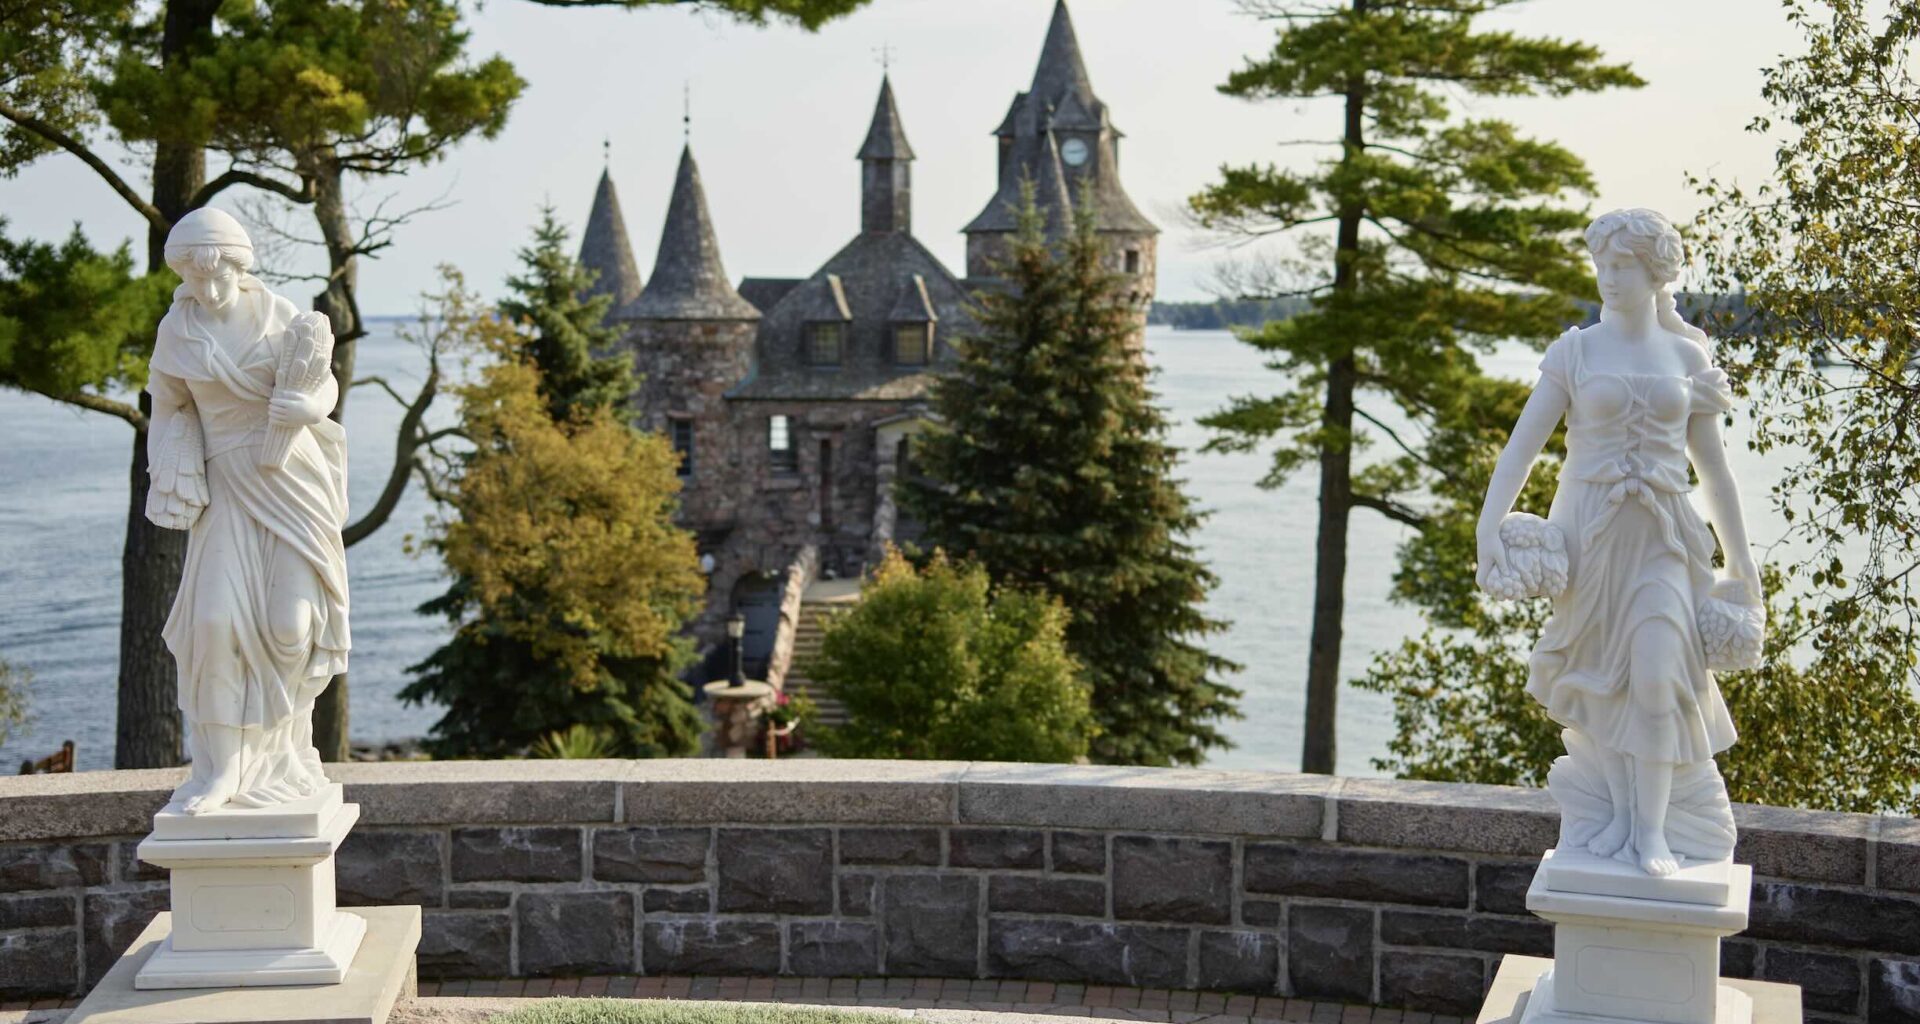 Boldt-Castle-Garden is one of the best romantic things to do in the 1000 islands